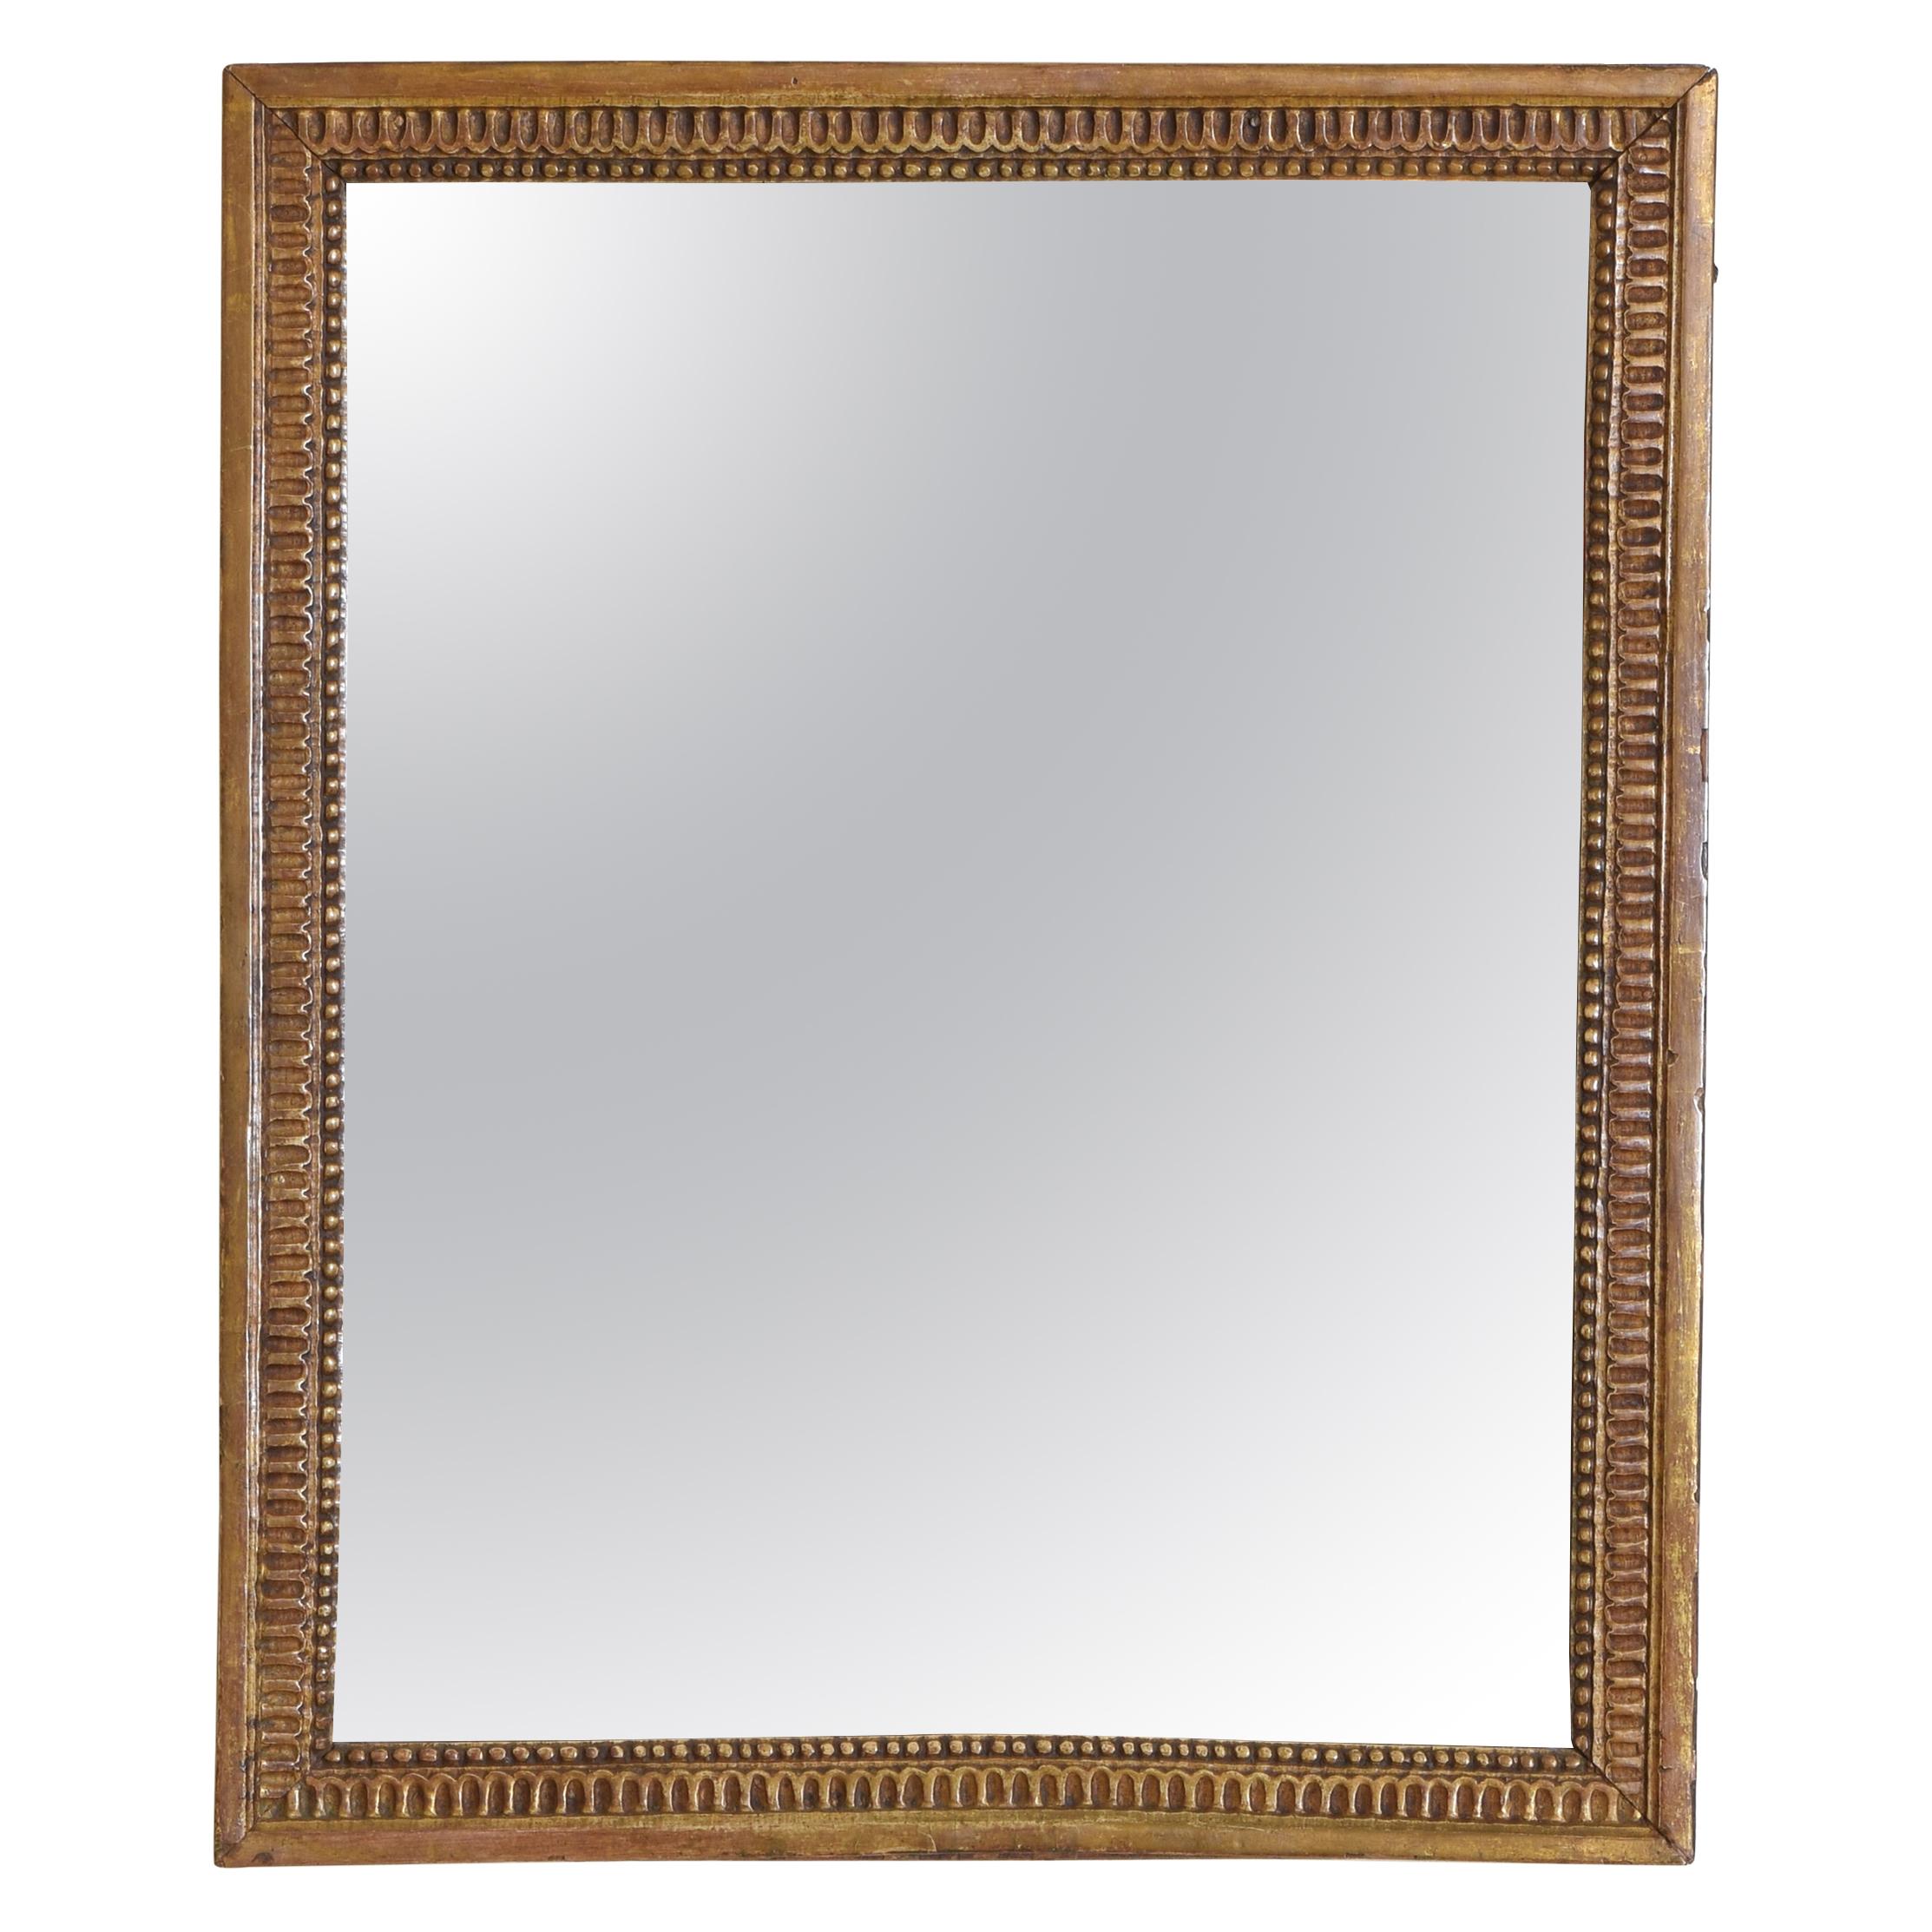 French Neoclassic Carved Giltwood Wall Mirror, First Quarter 19th Century